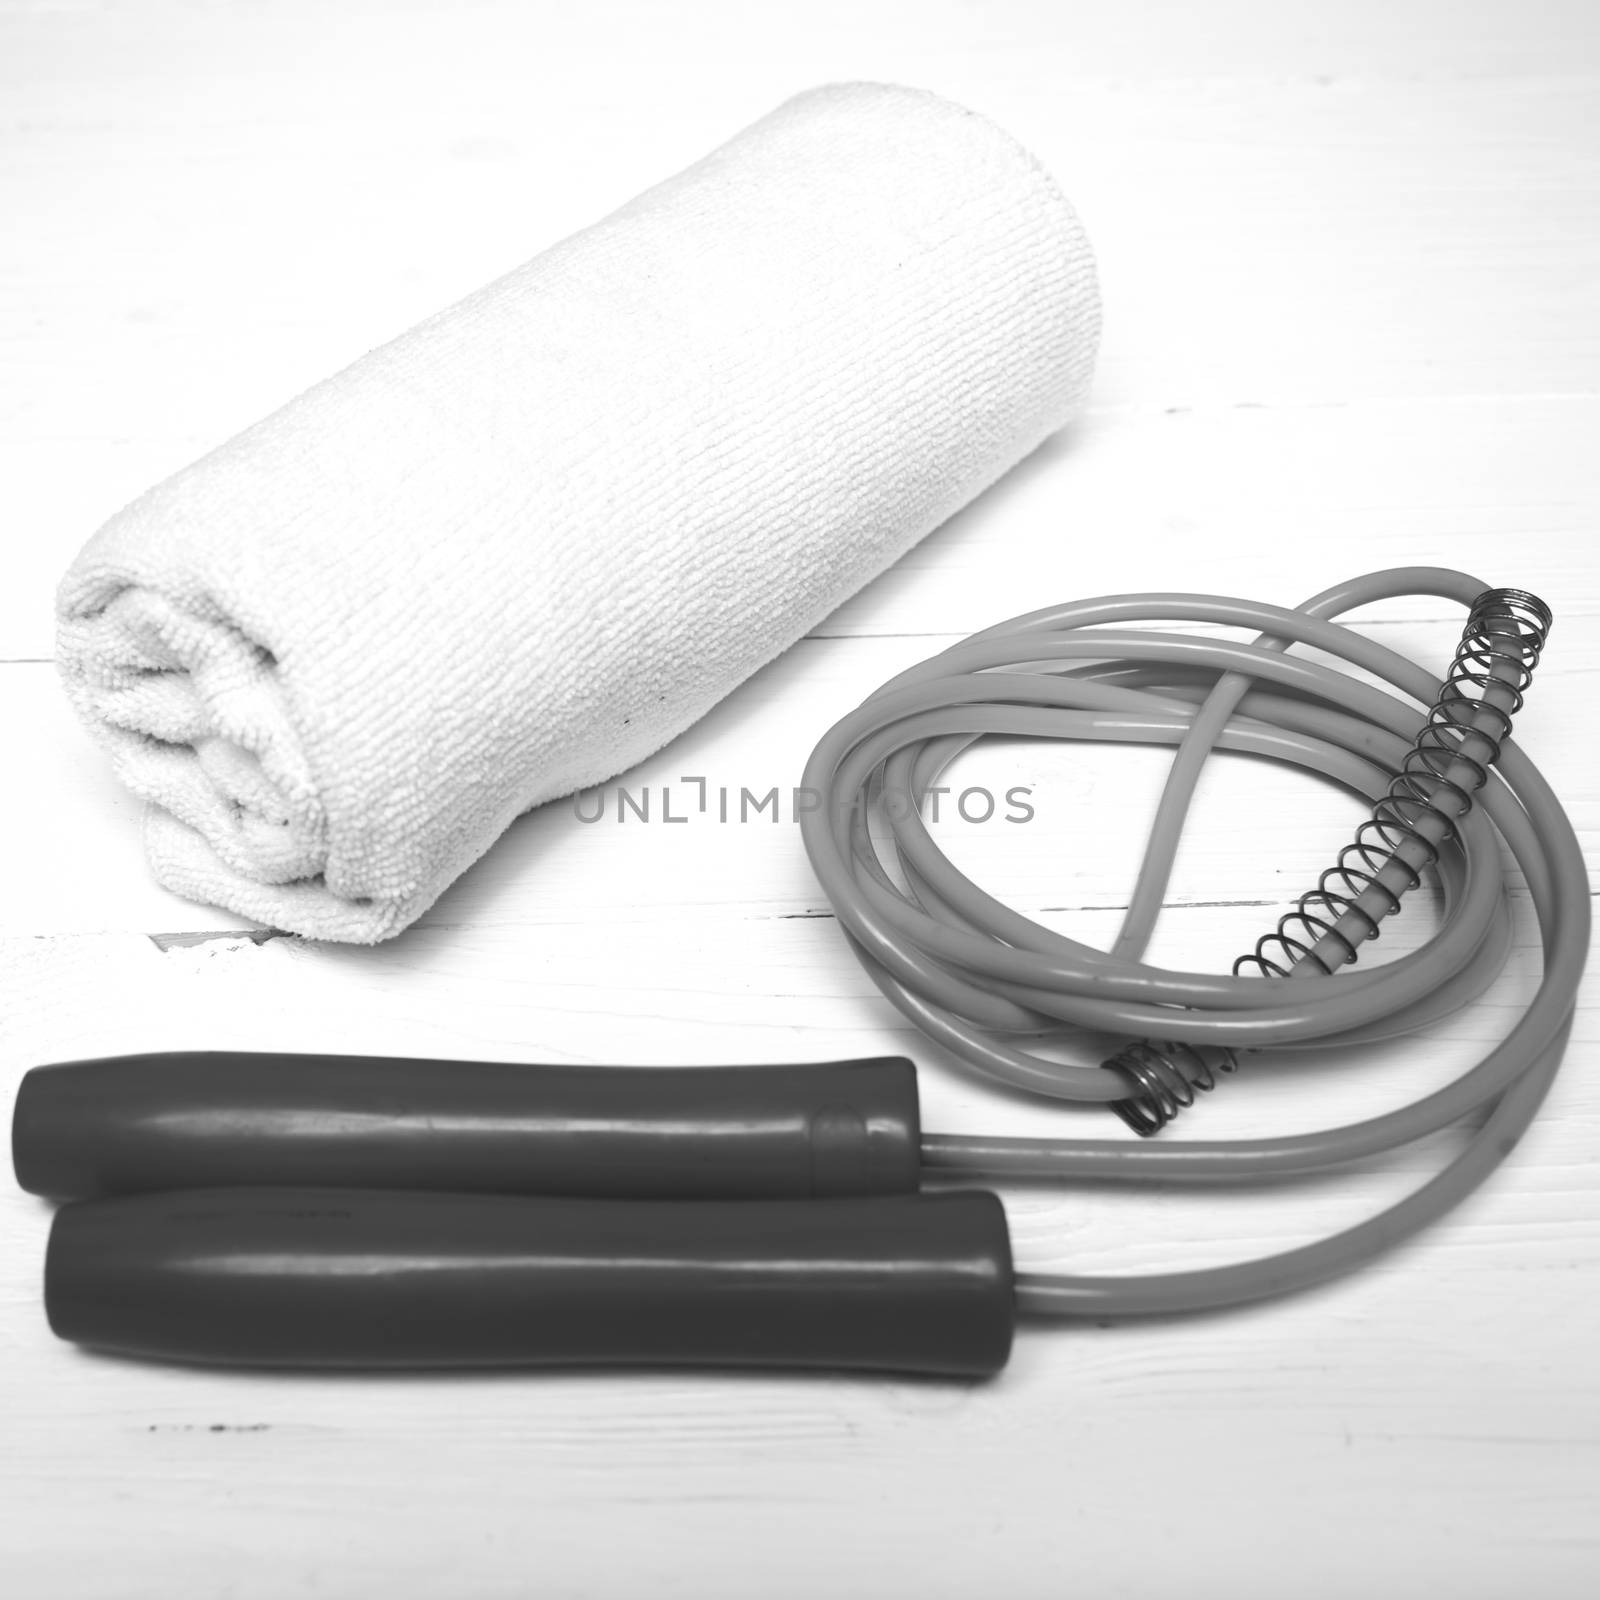 fitness equipment:white towel,jumping rope on white wood table black and white color style